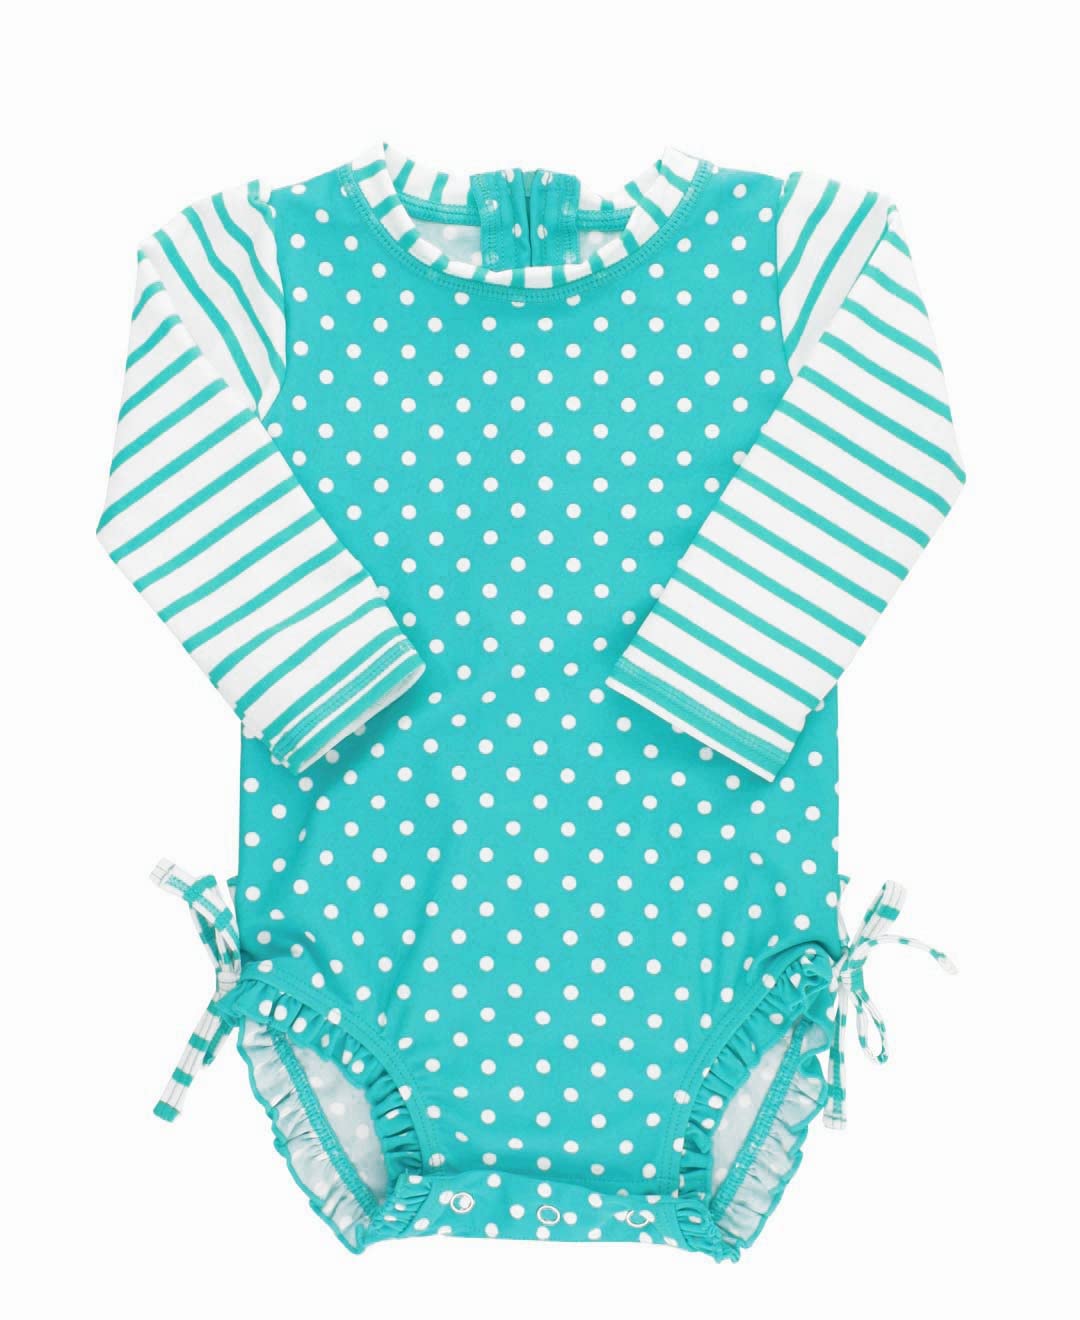 RuffleButts® Baby/Toddler Girls Long Sleeve One Piece Swimsuit with UPF 50+ Sun Protection